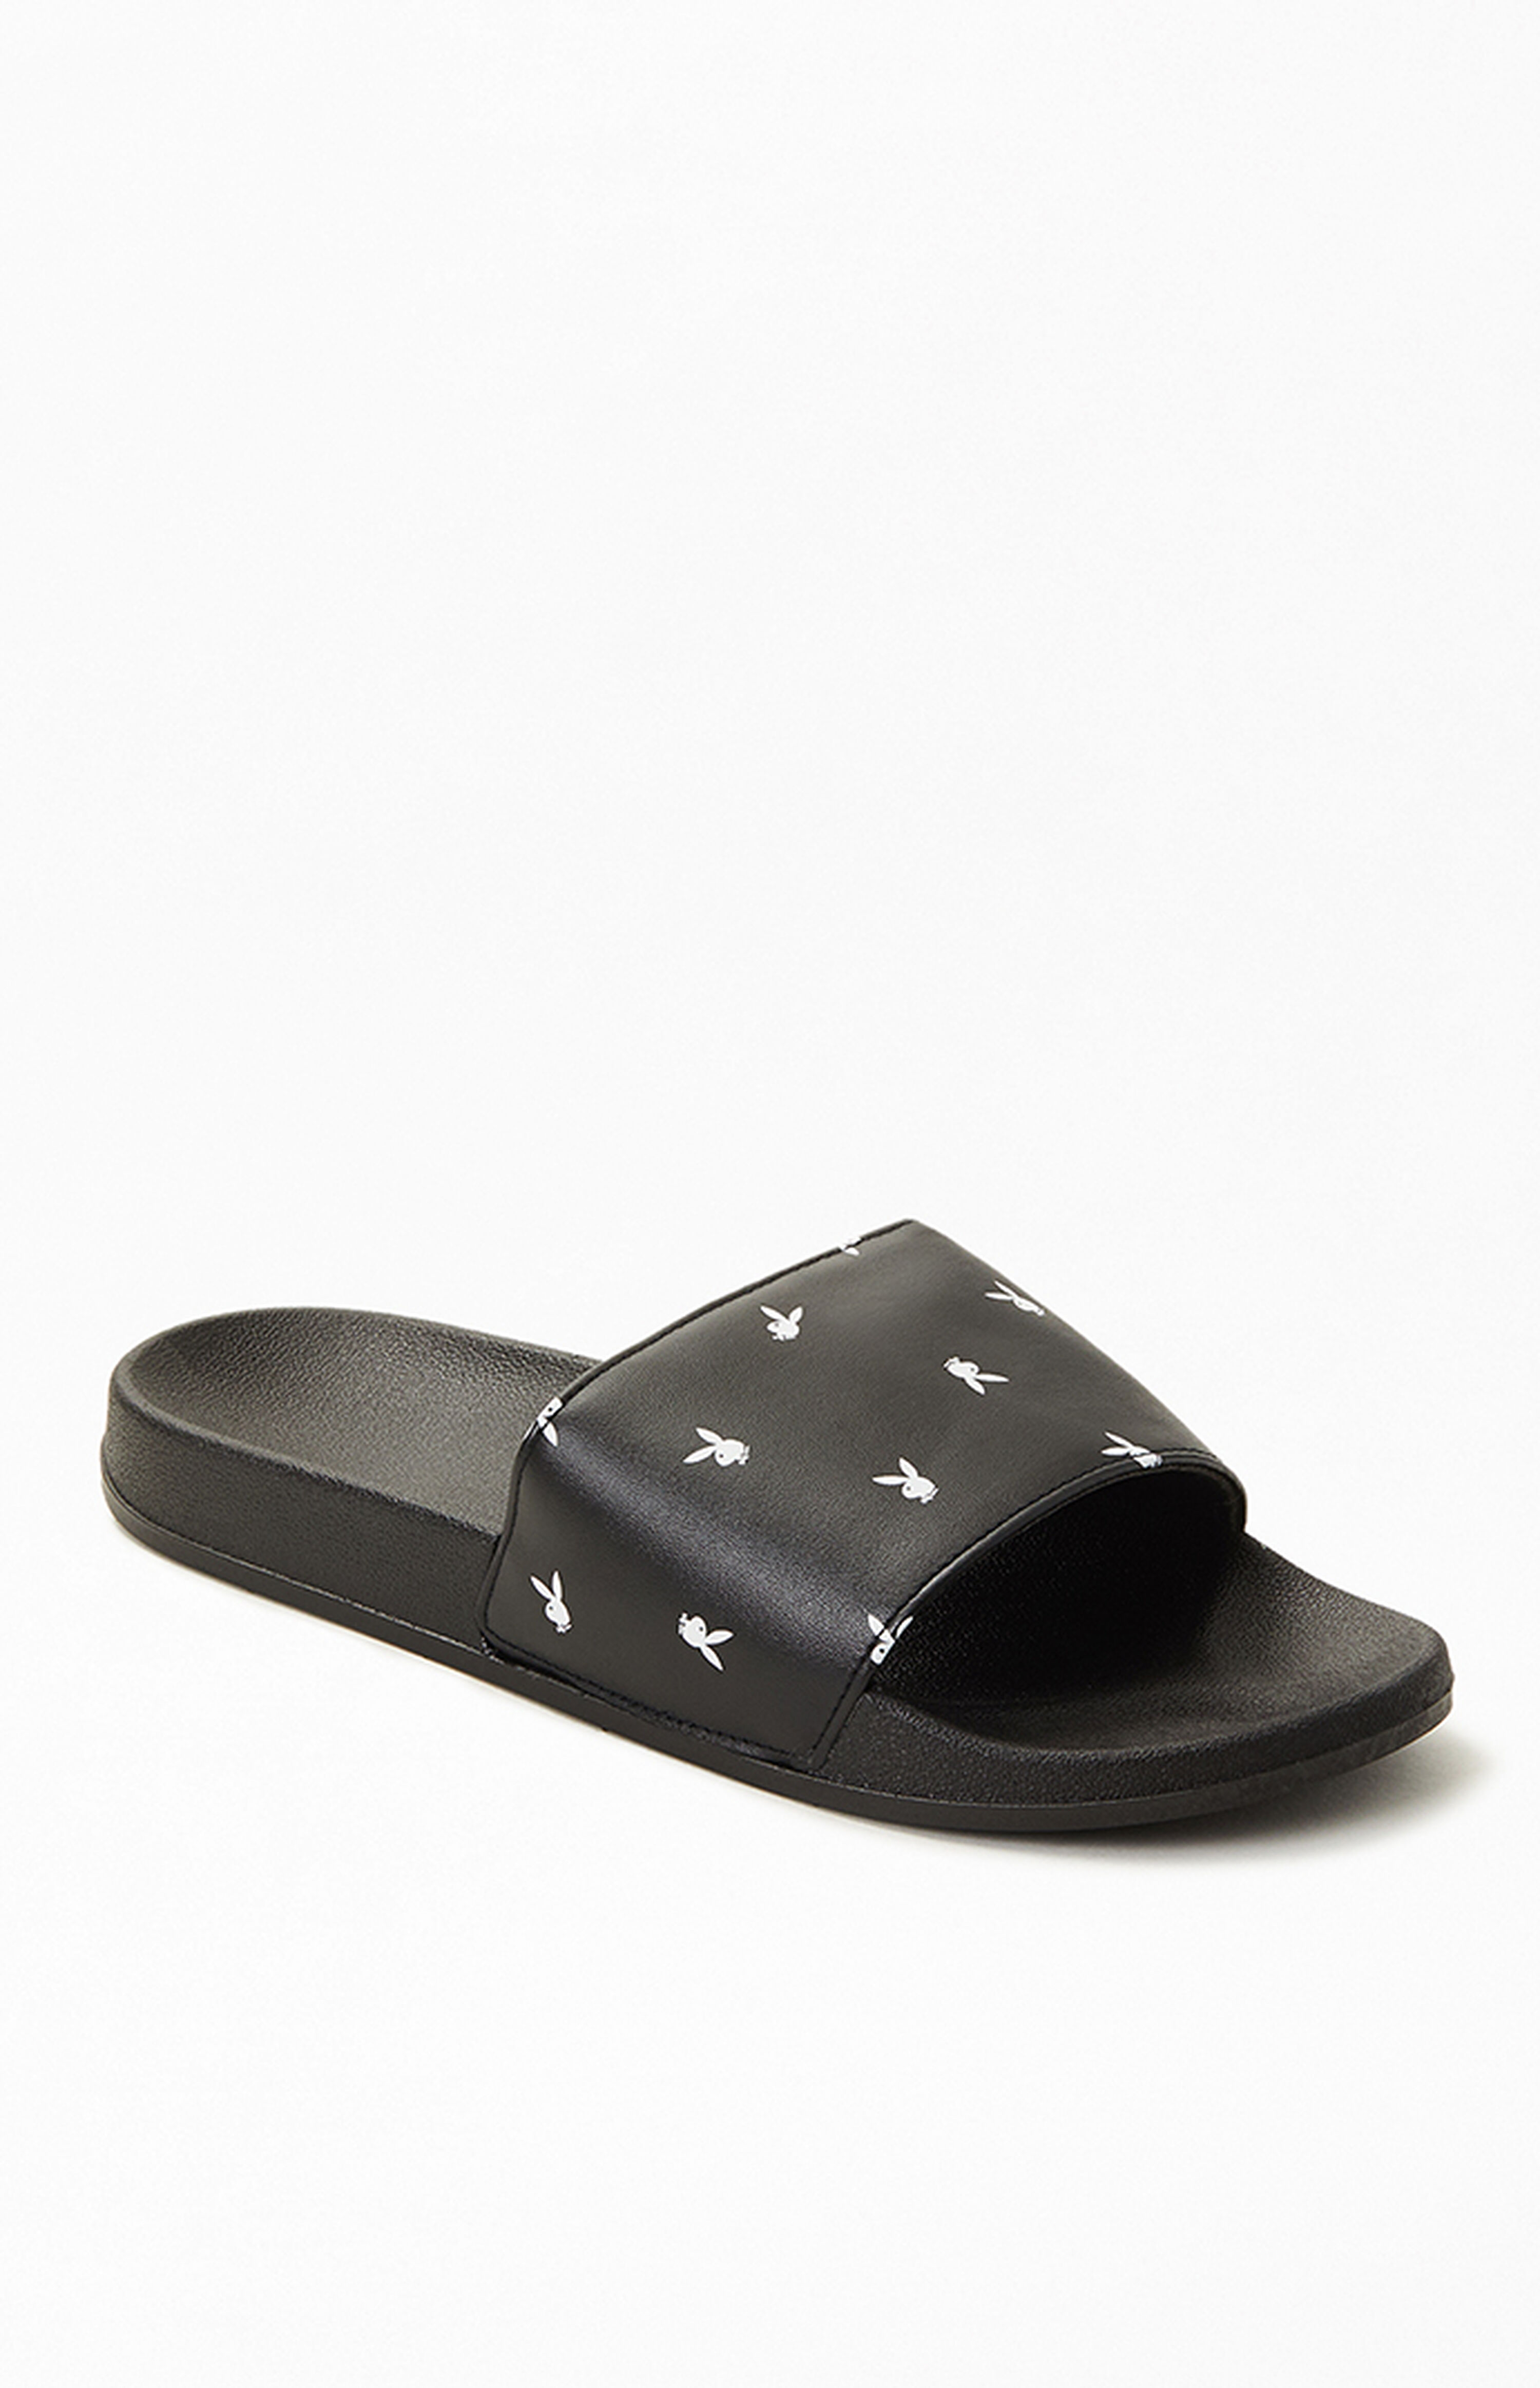 Playboy By PacSun All Over Bunny Slide Sandals | PacSun